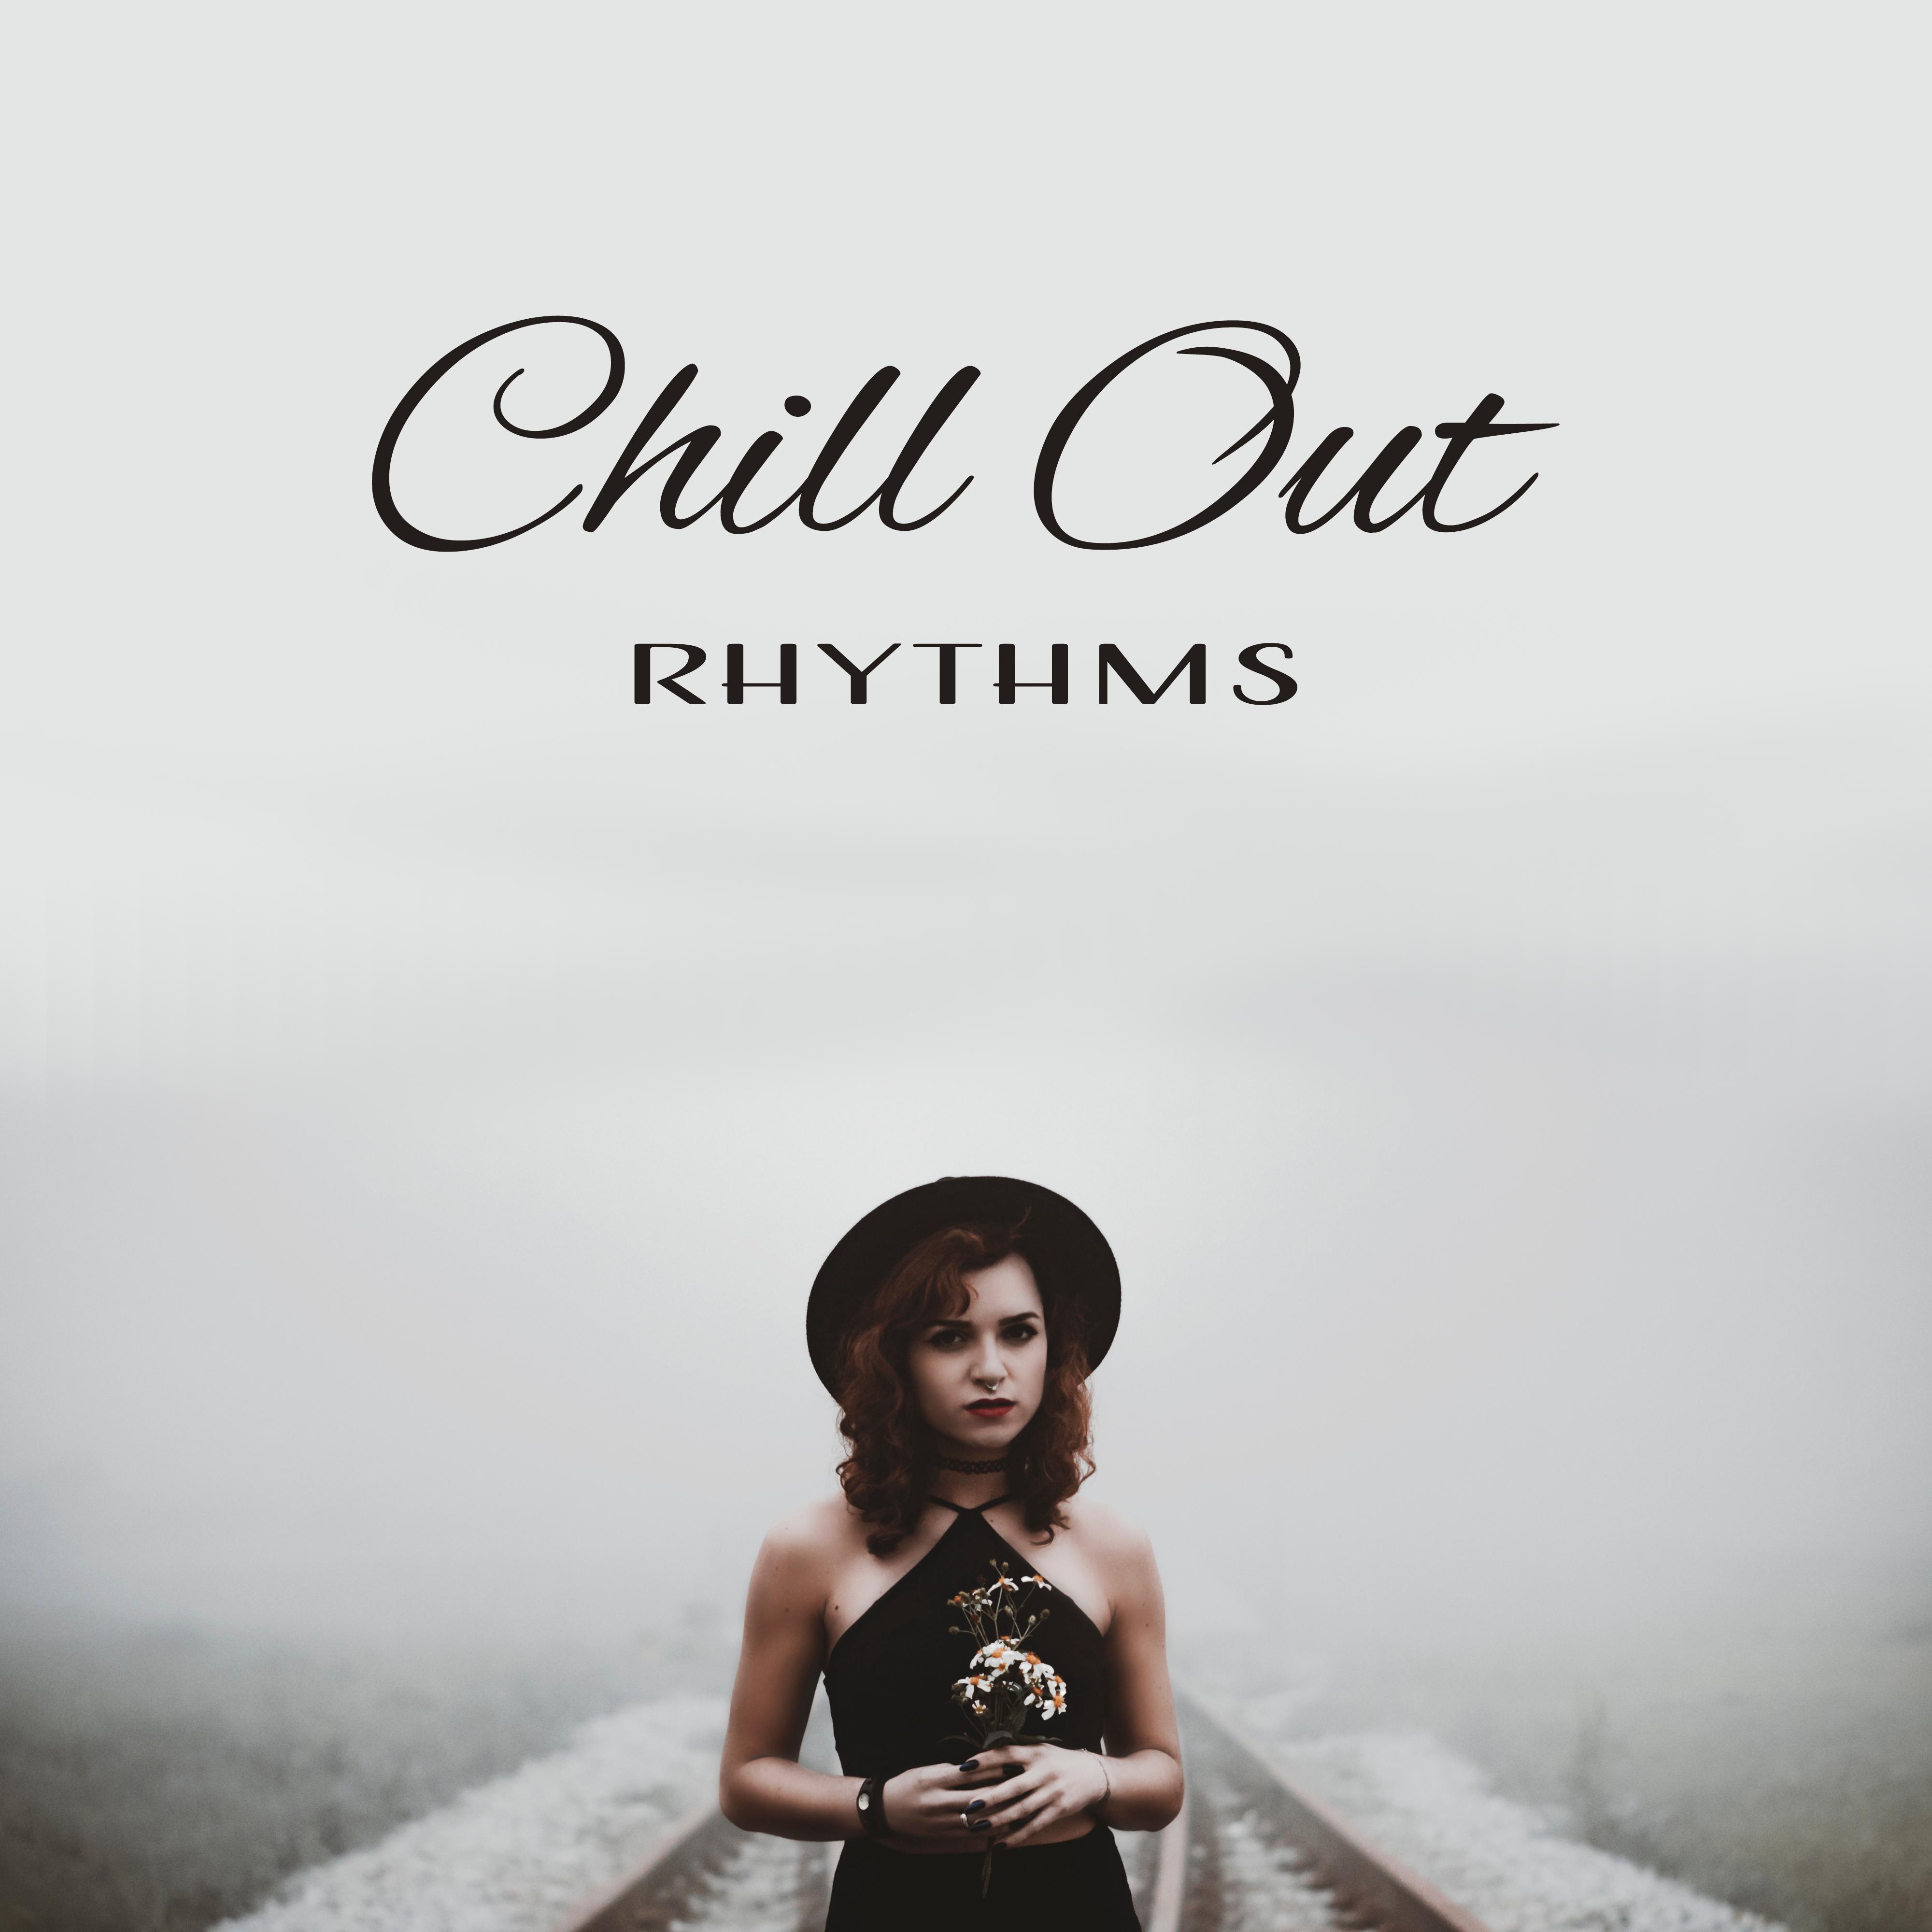 Chill Out Rhythms – Easy Listening, Summer Songs, Chill Out Beats, Peaceful Vibes